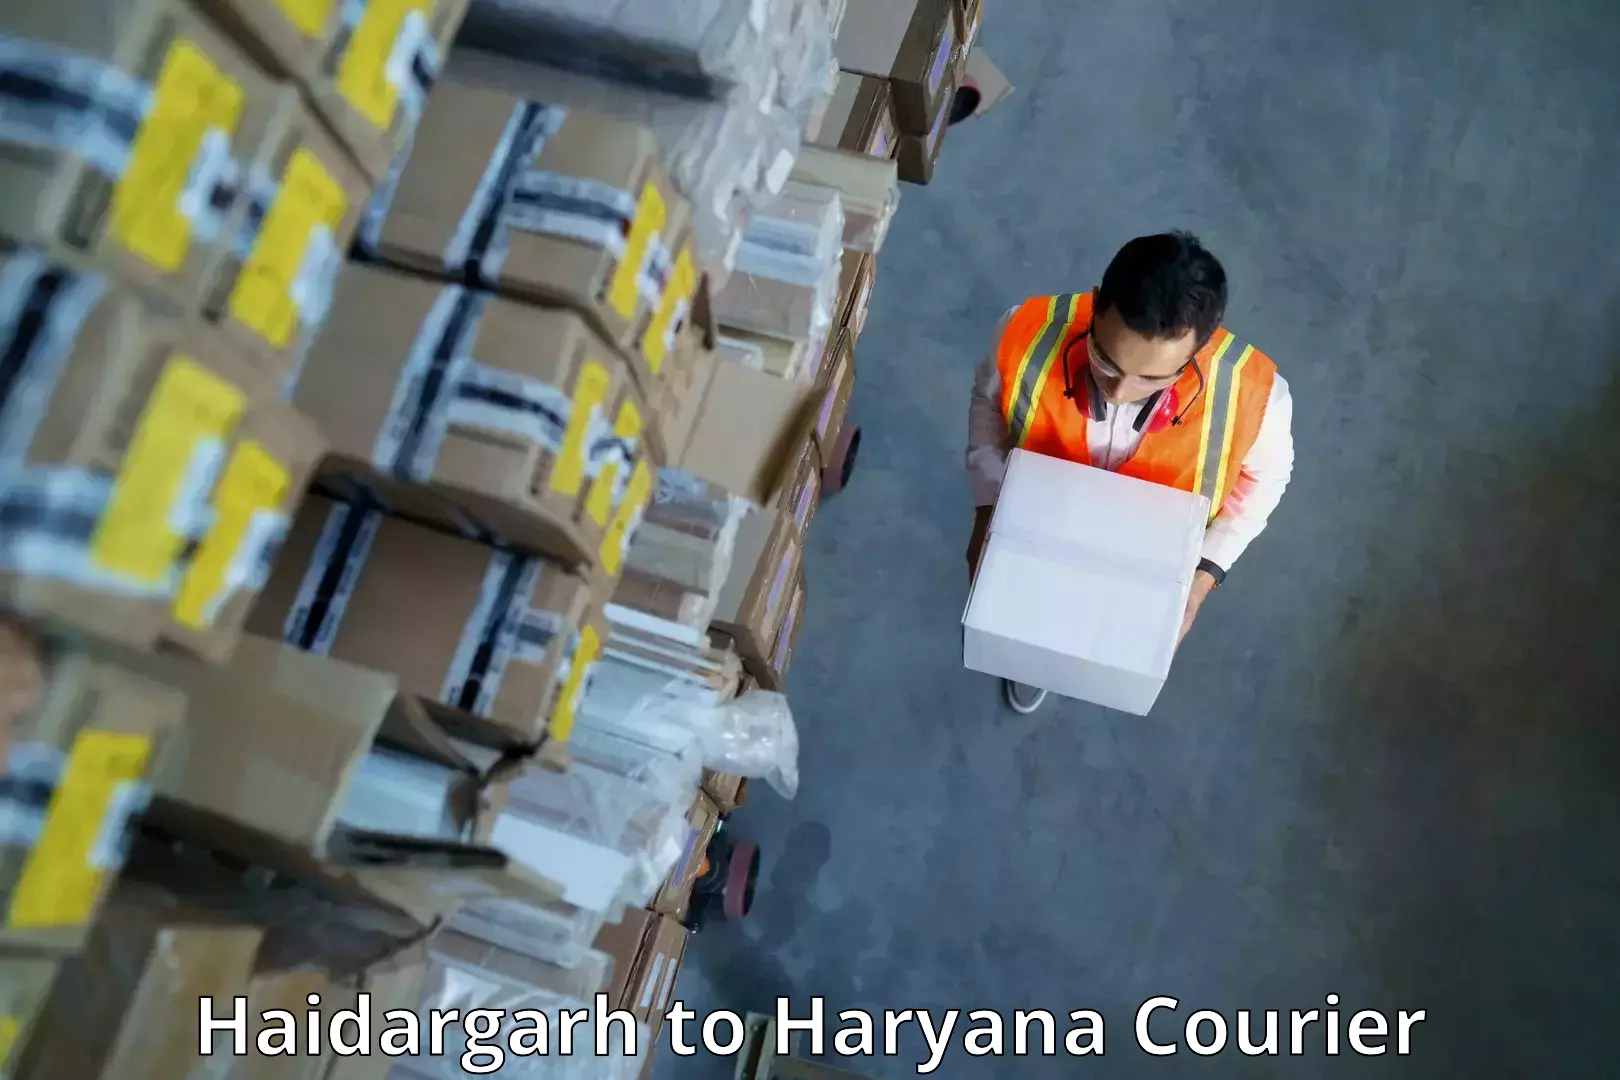 Personalized courier experiences Haidargarh to Hansi